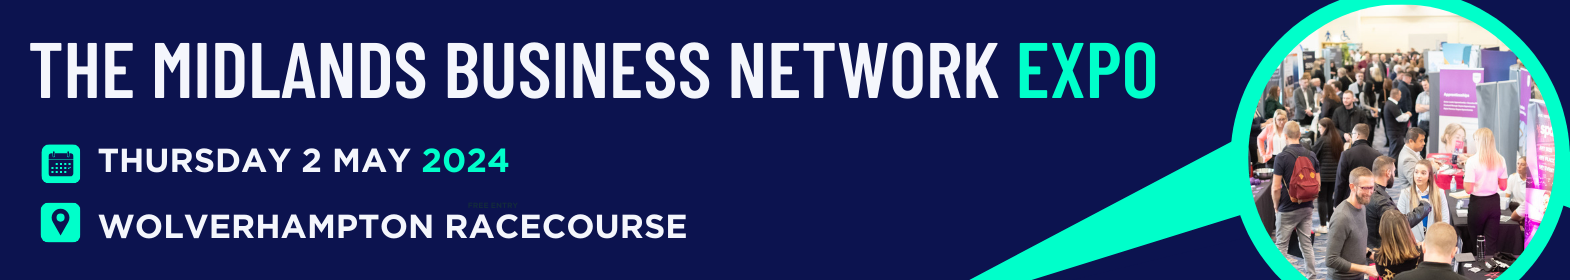 The Midlands Business Network 